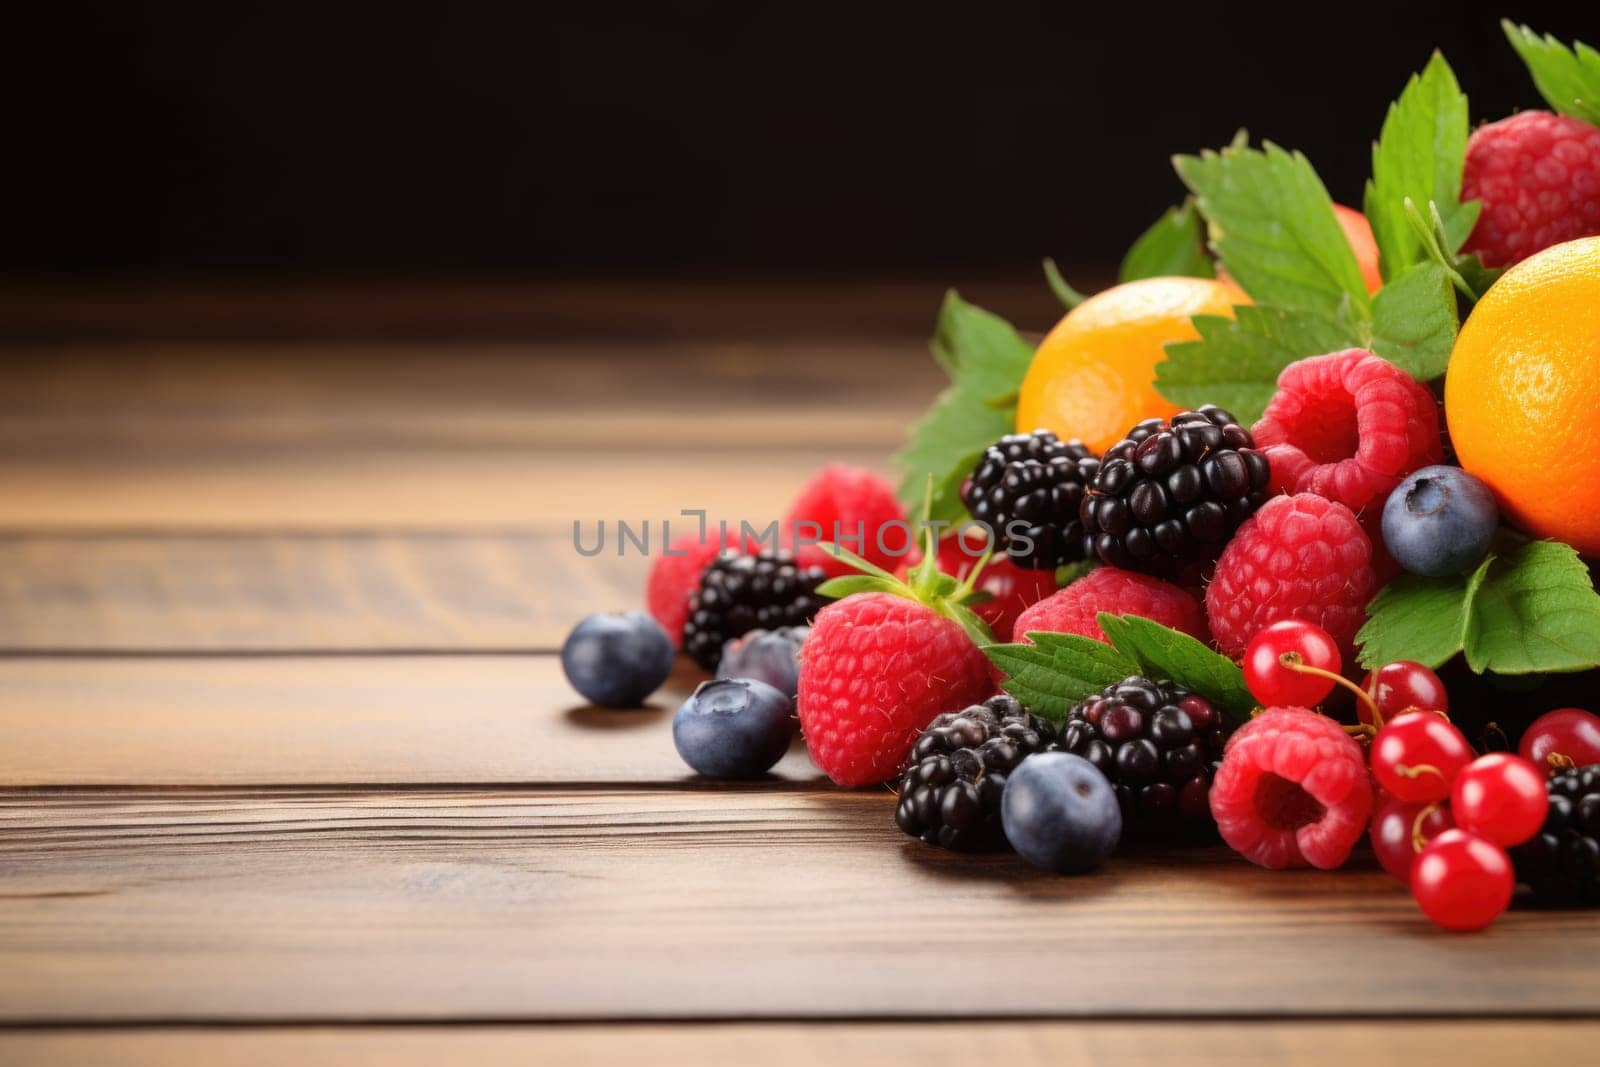 A bunch of summer berries on a wooden table close-up. Strawberry, raspberries, blackberries.